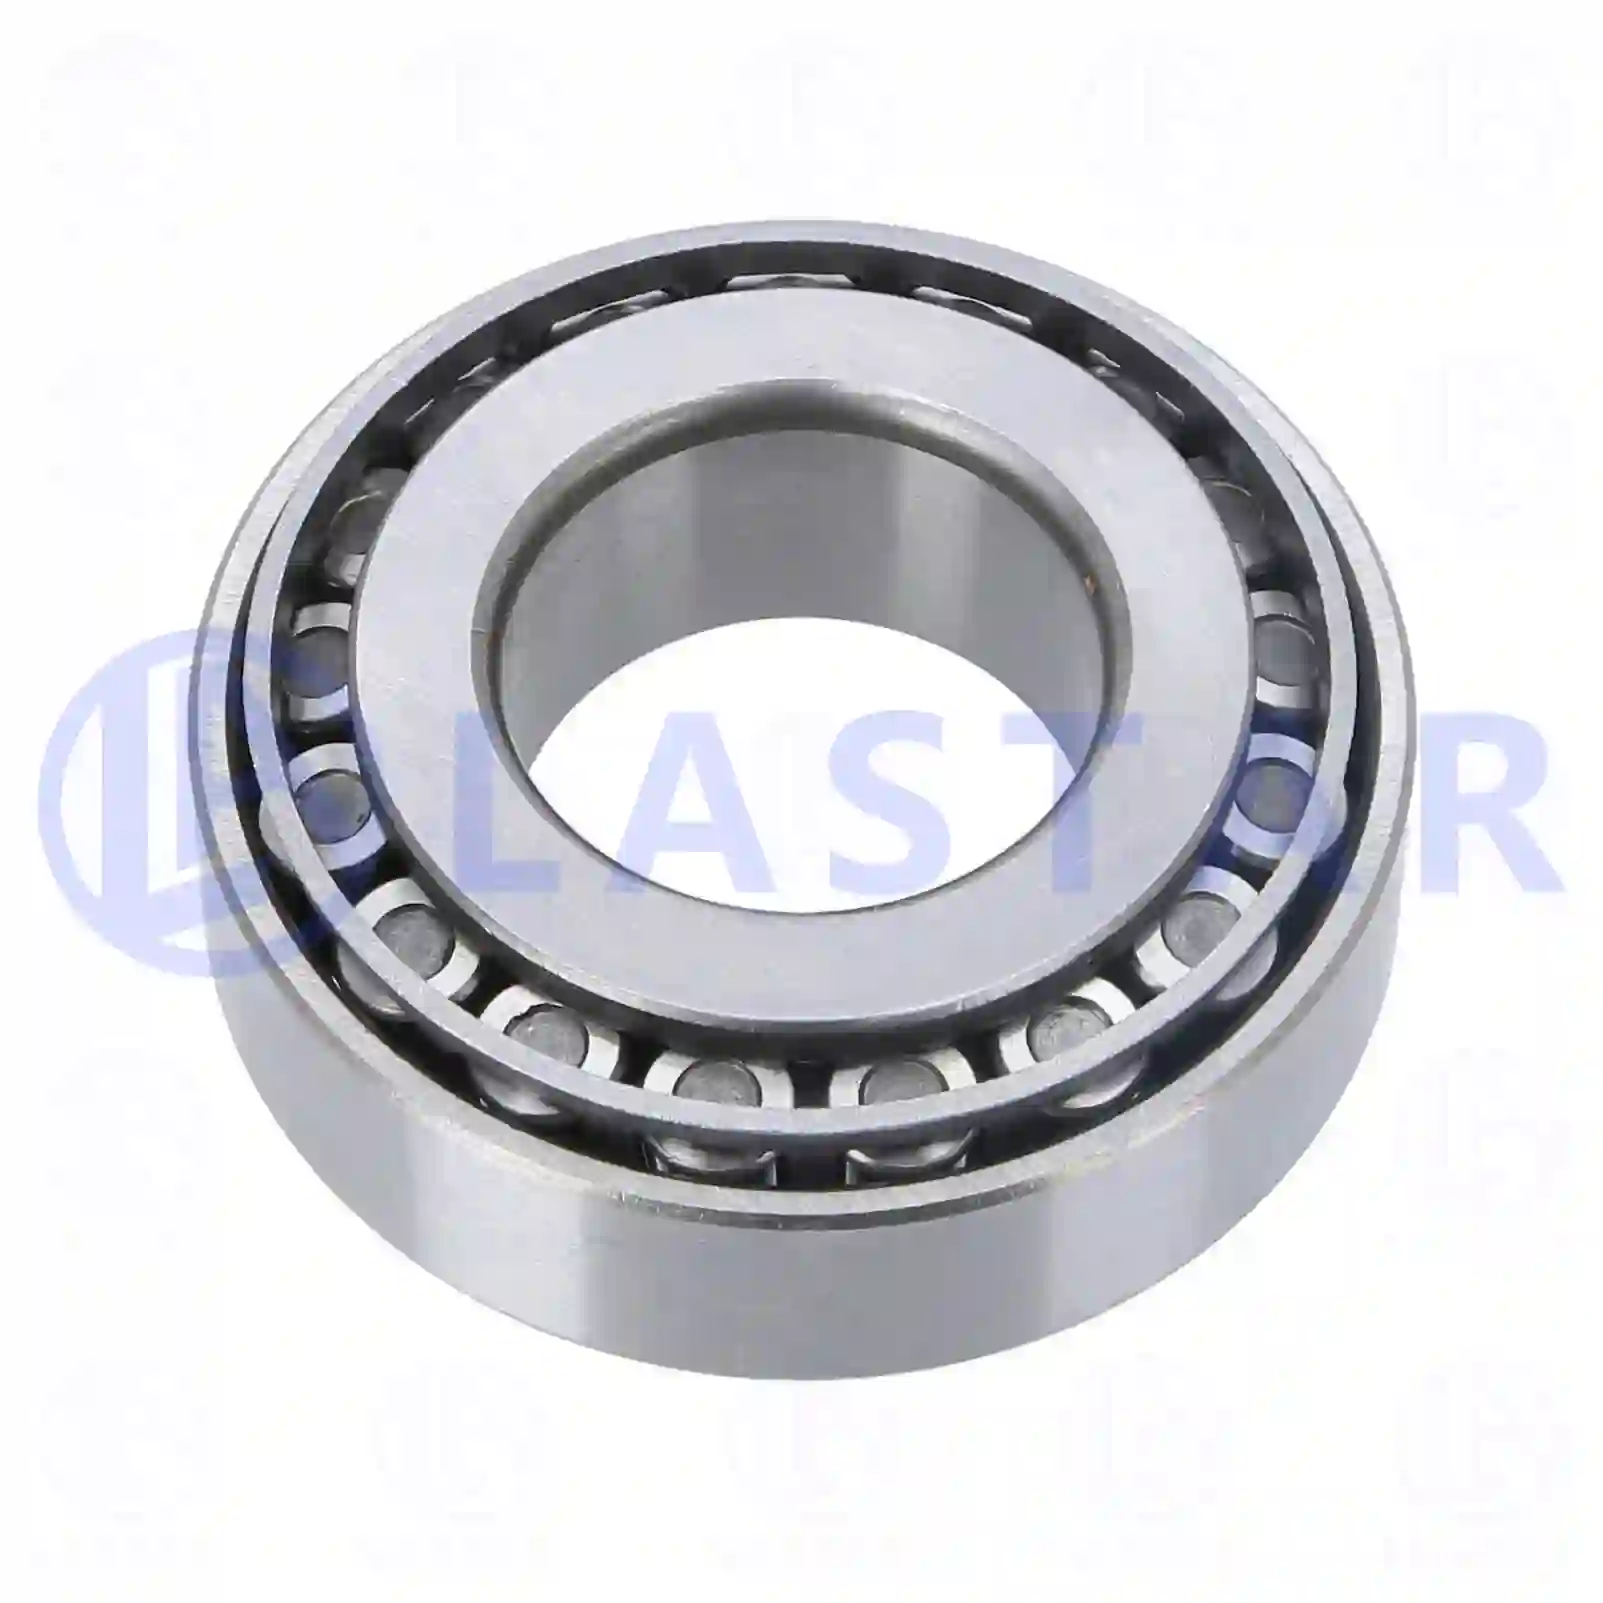 Bearings Tapered roller bearing, la no: 77724816 ,  oem no:ABL5781, ABU8700, 01905300, 01564990, 01905300, 3661013600, 272716, 354076, 022370SI, 22370, 52828, 183326 Lastar Spare Part | Truck Spare Parts, Auotomotive Spare Parts